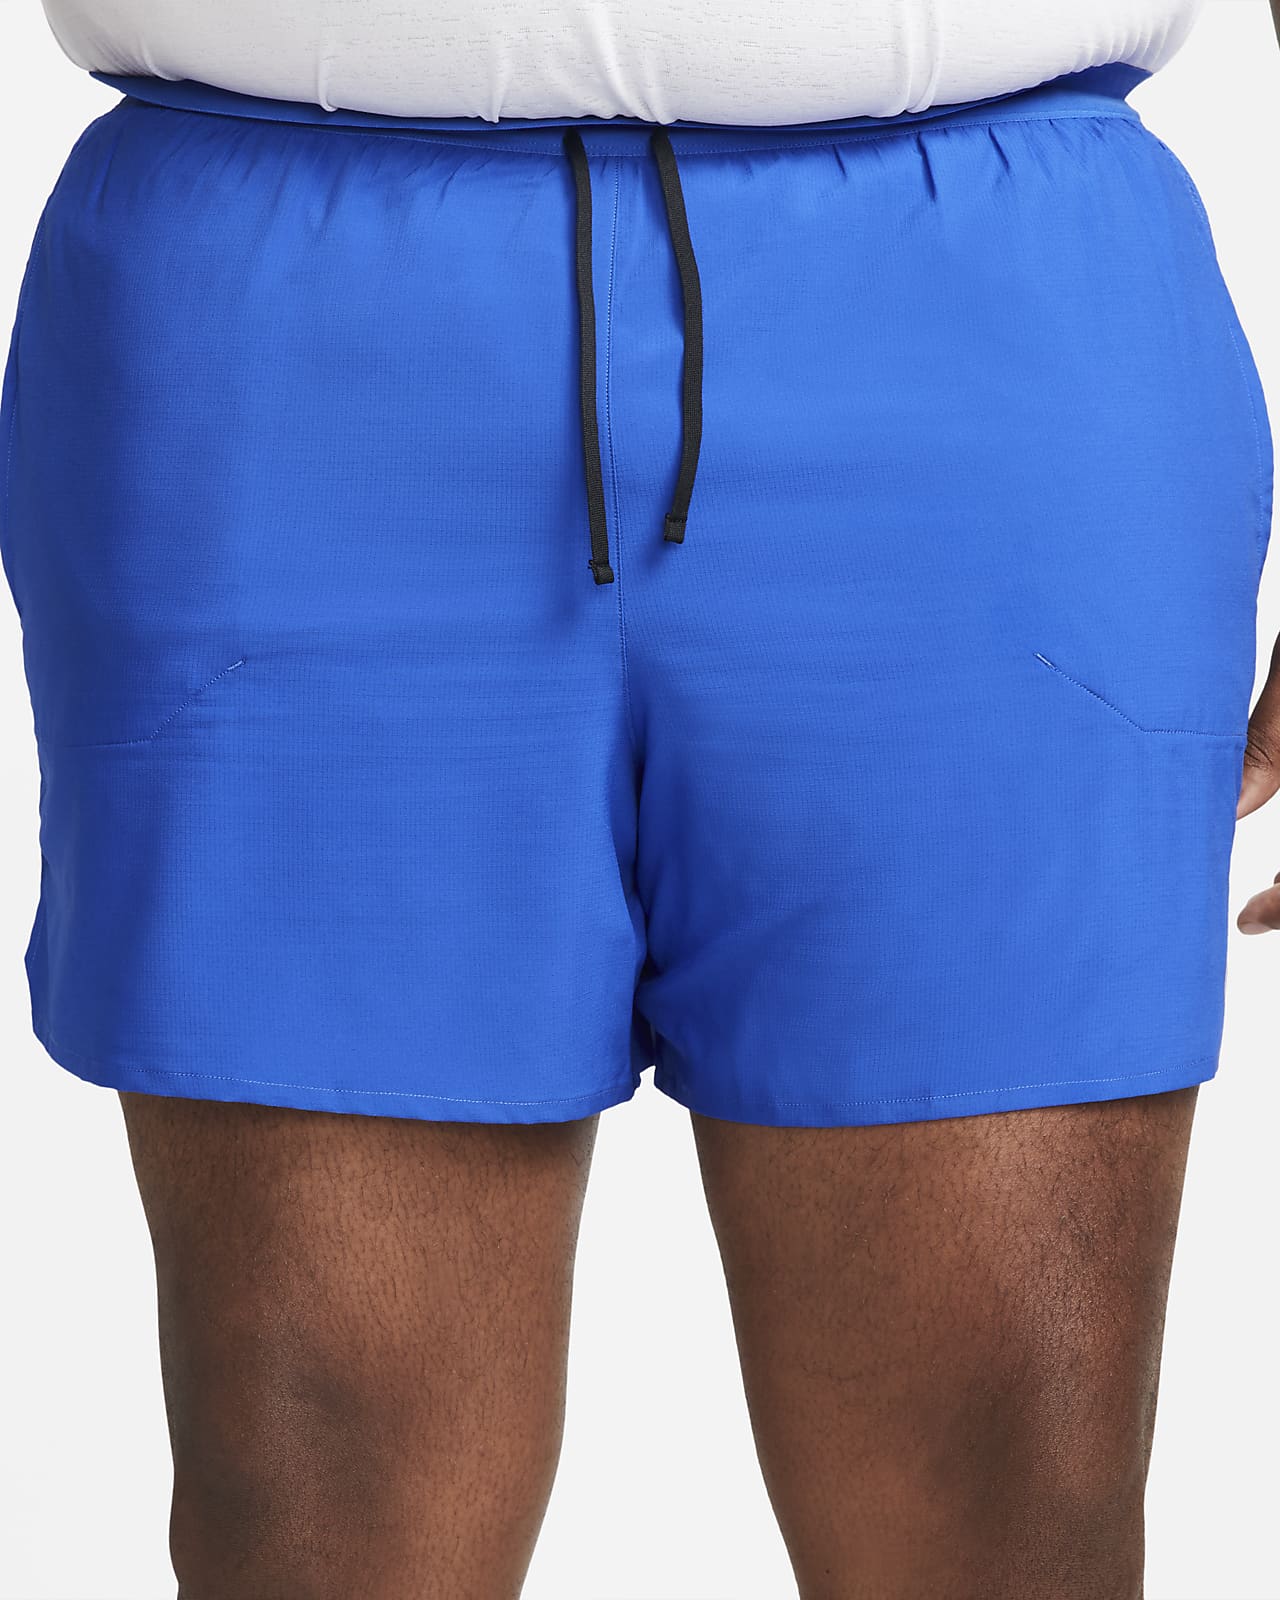 Nike Stride Men's Dri-FIT 5 Brief-Lined Running Shorts.